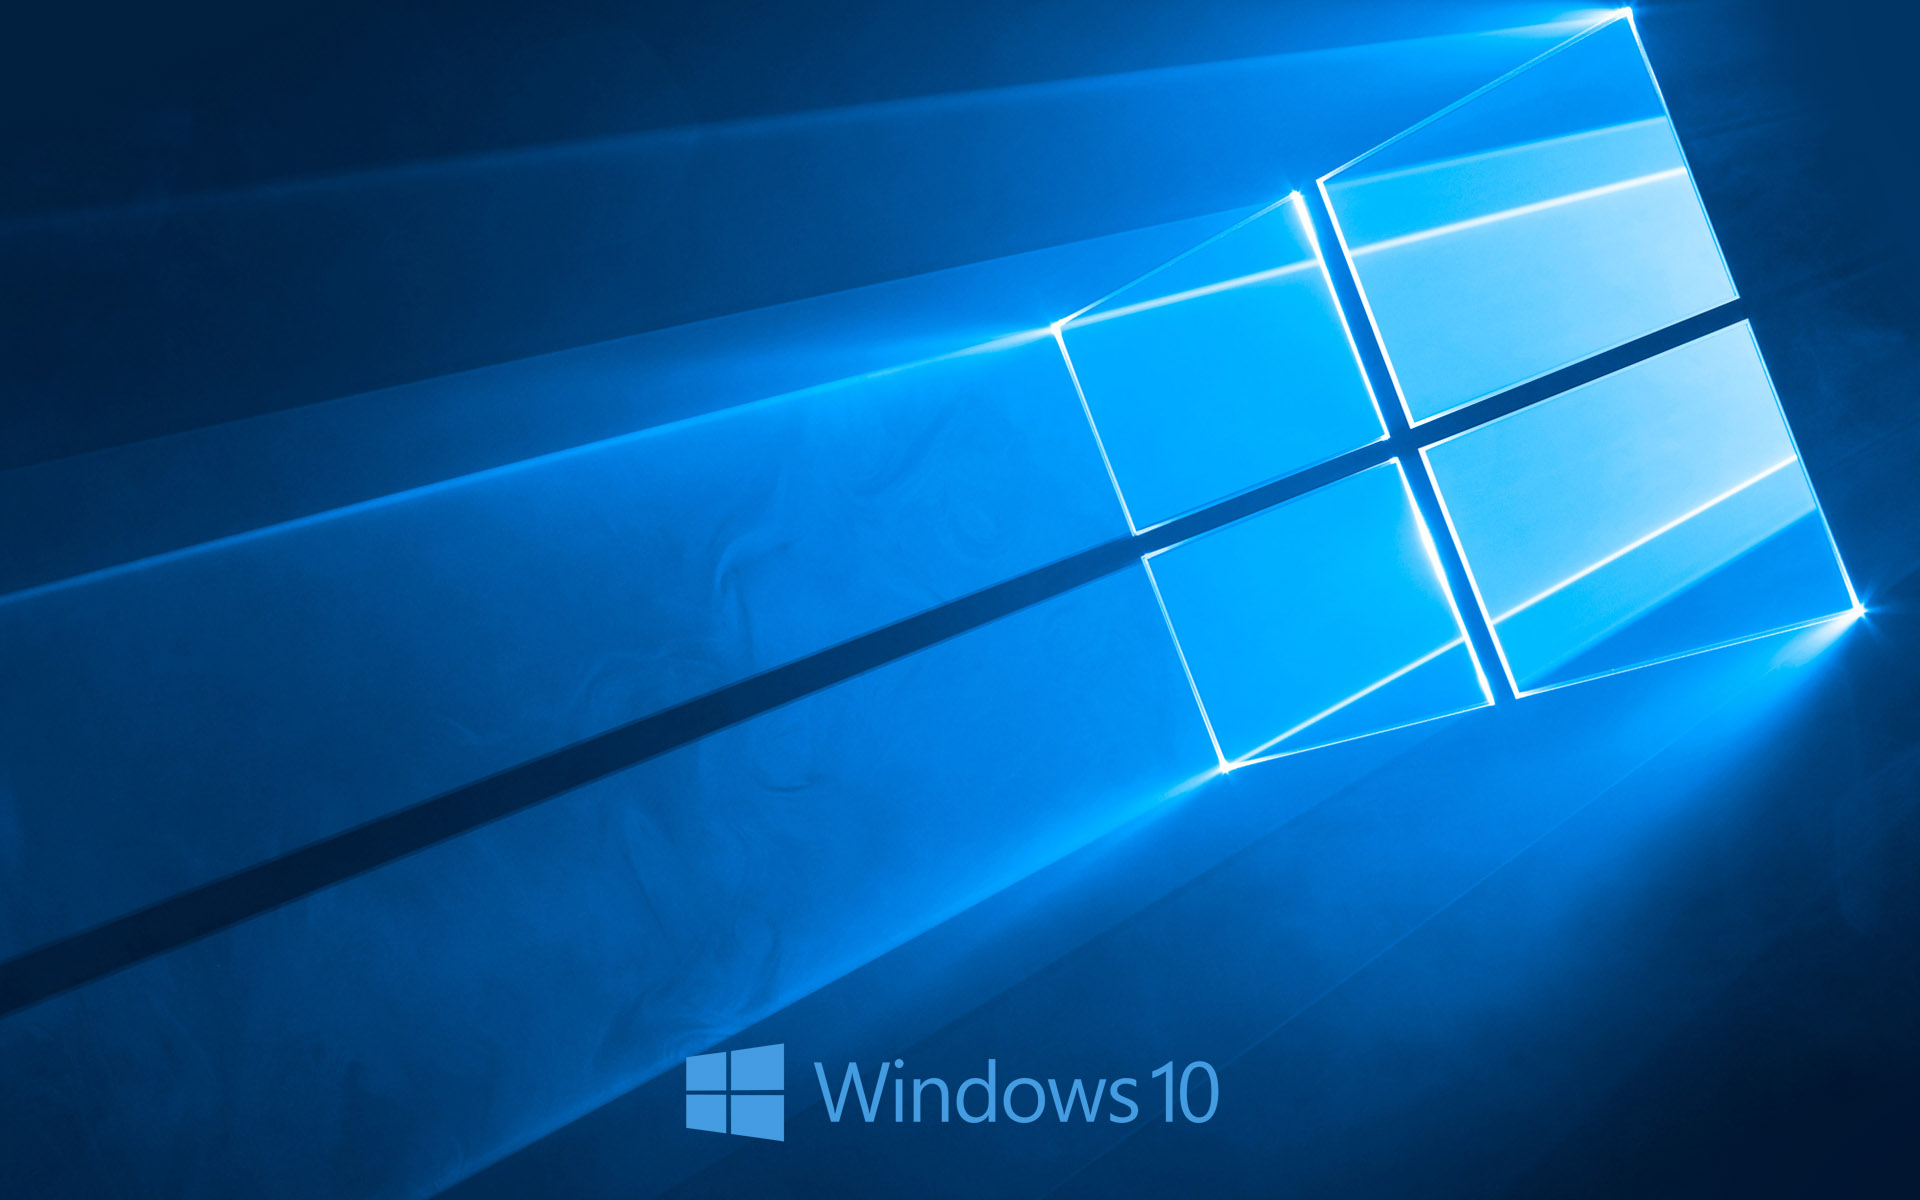 Here is how to force your Windows PC to update to Windows 10